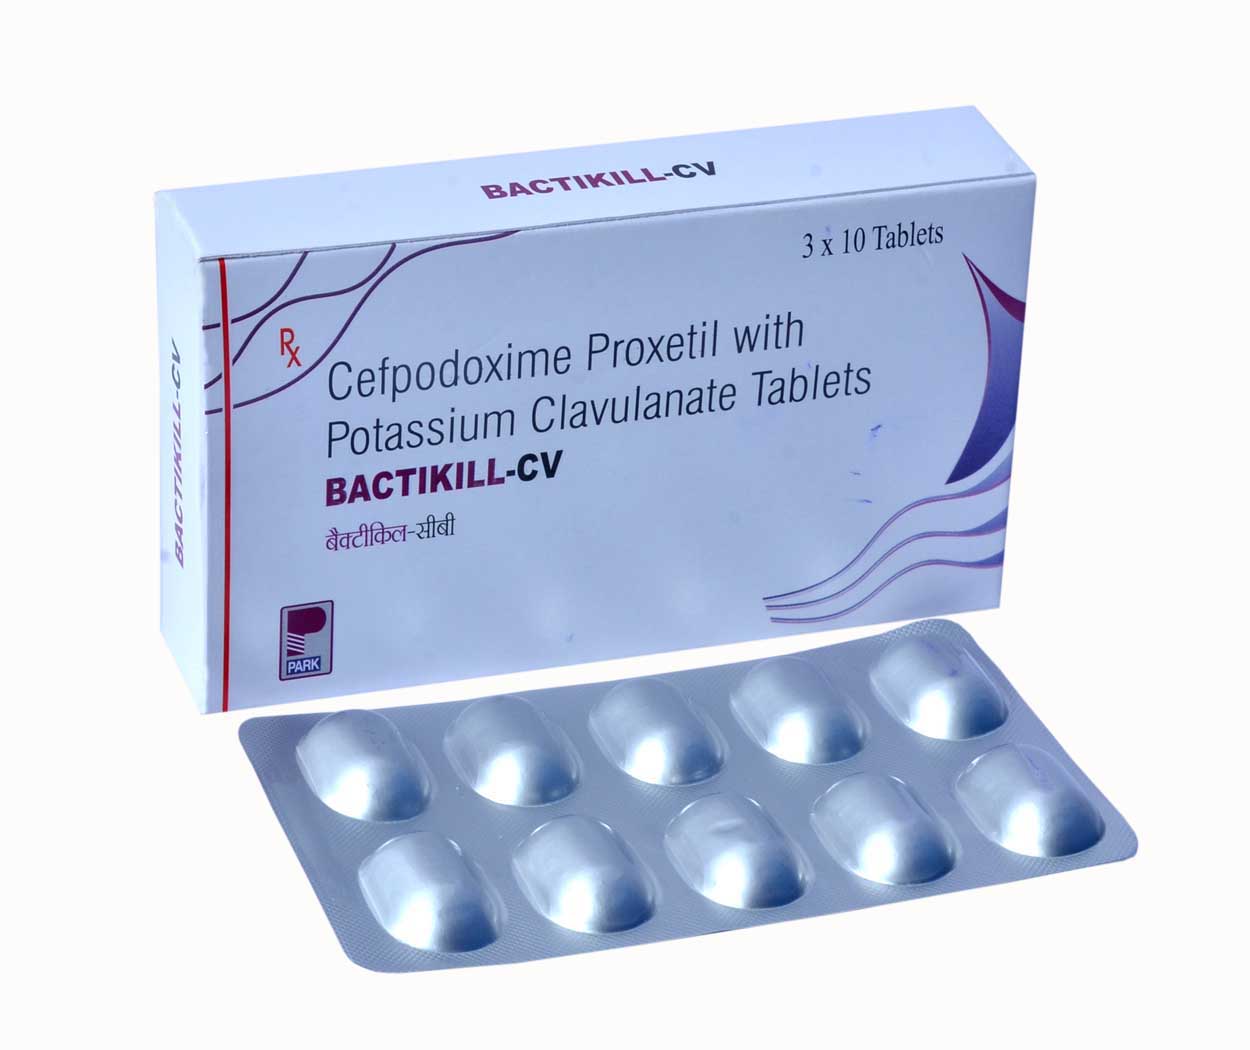 Product Name: BACTIKILL CV, Compositions of BACTIKILL CV are Cefpodoxime Proxetil with Potassium Clavulanate Tablets - Park Pharmaceuticals